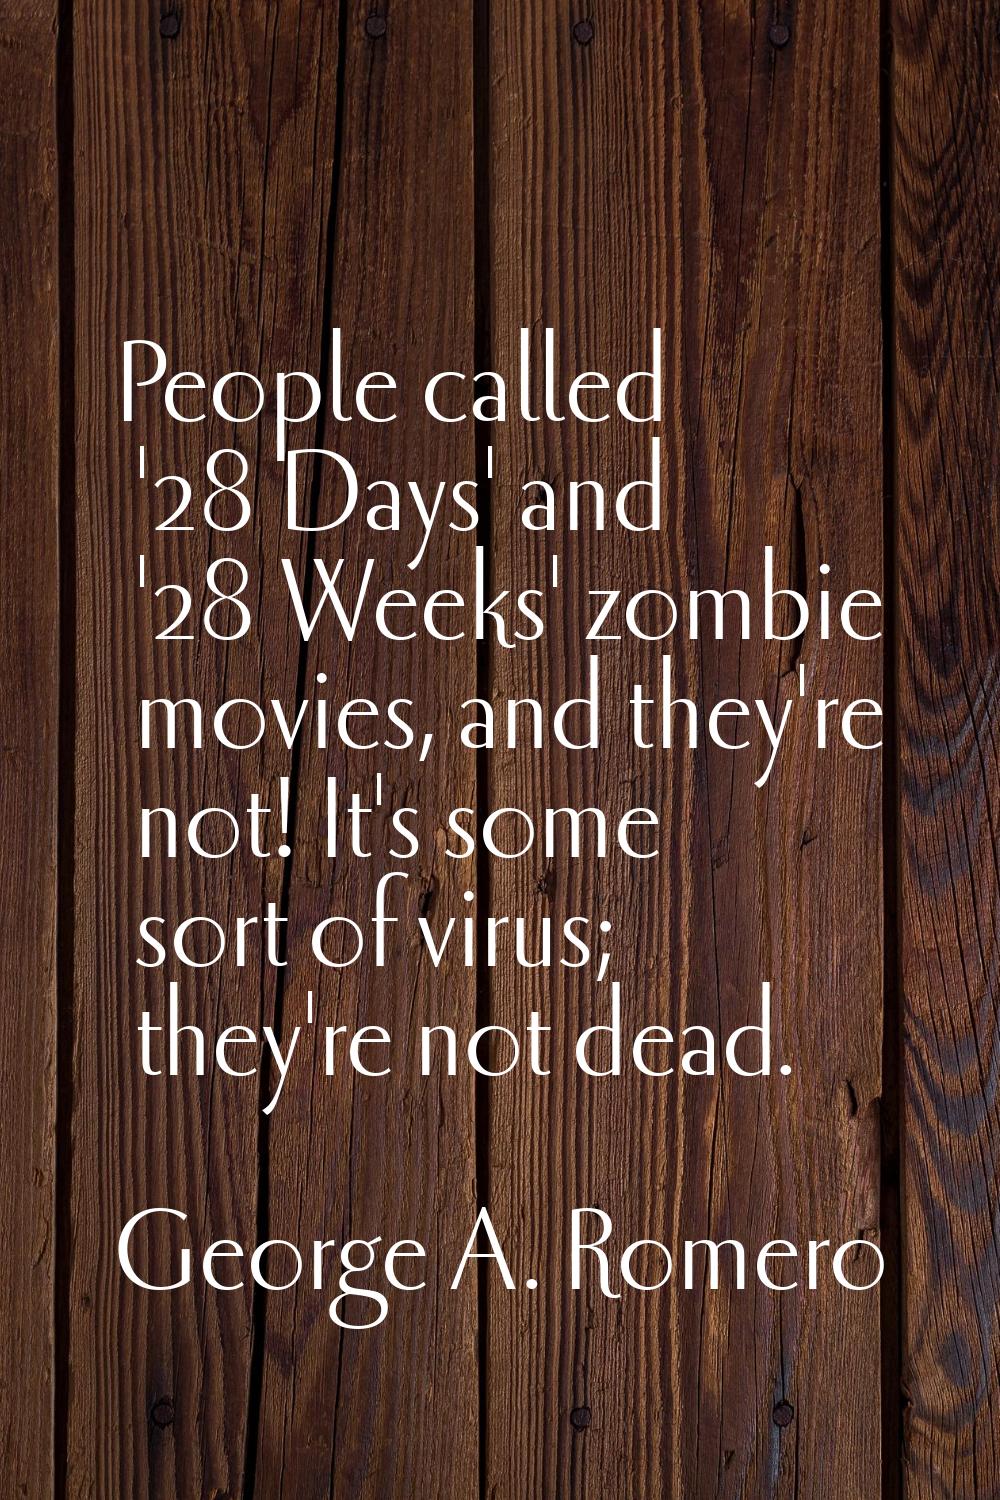 People called '28 Days' and '28 Weeks' zombie movies, and they're not! It's some sort of virus; the